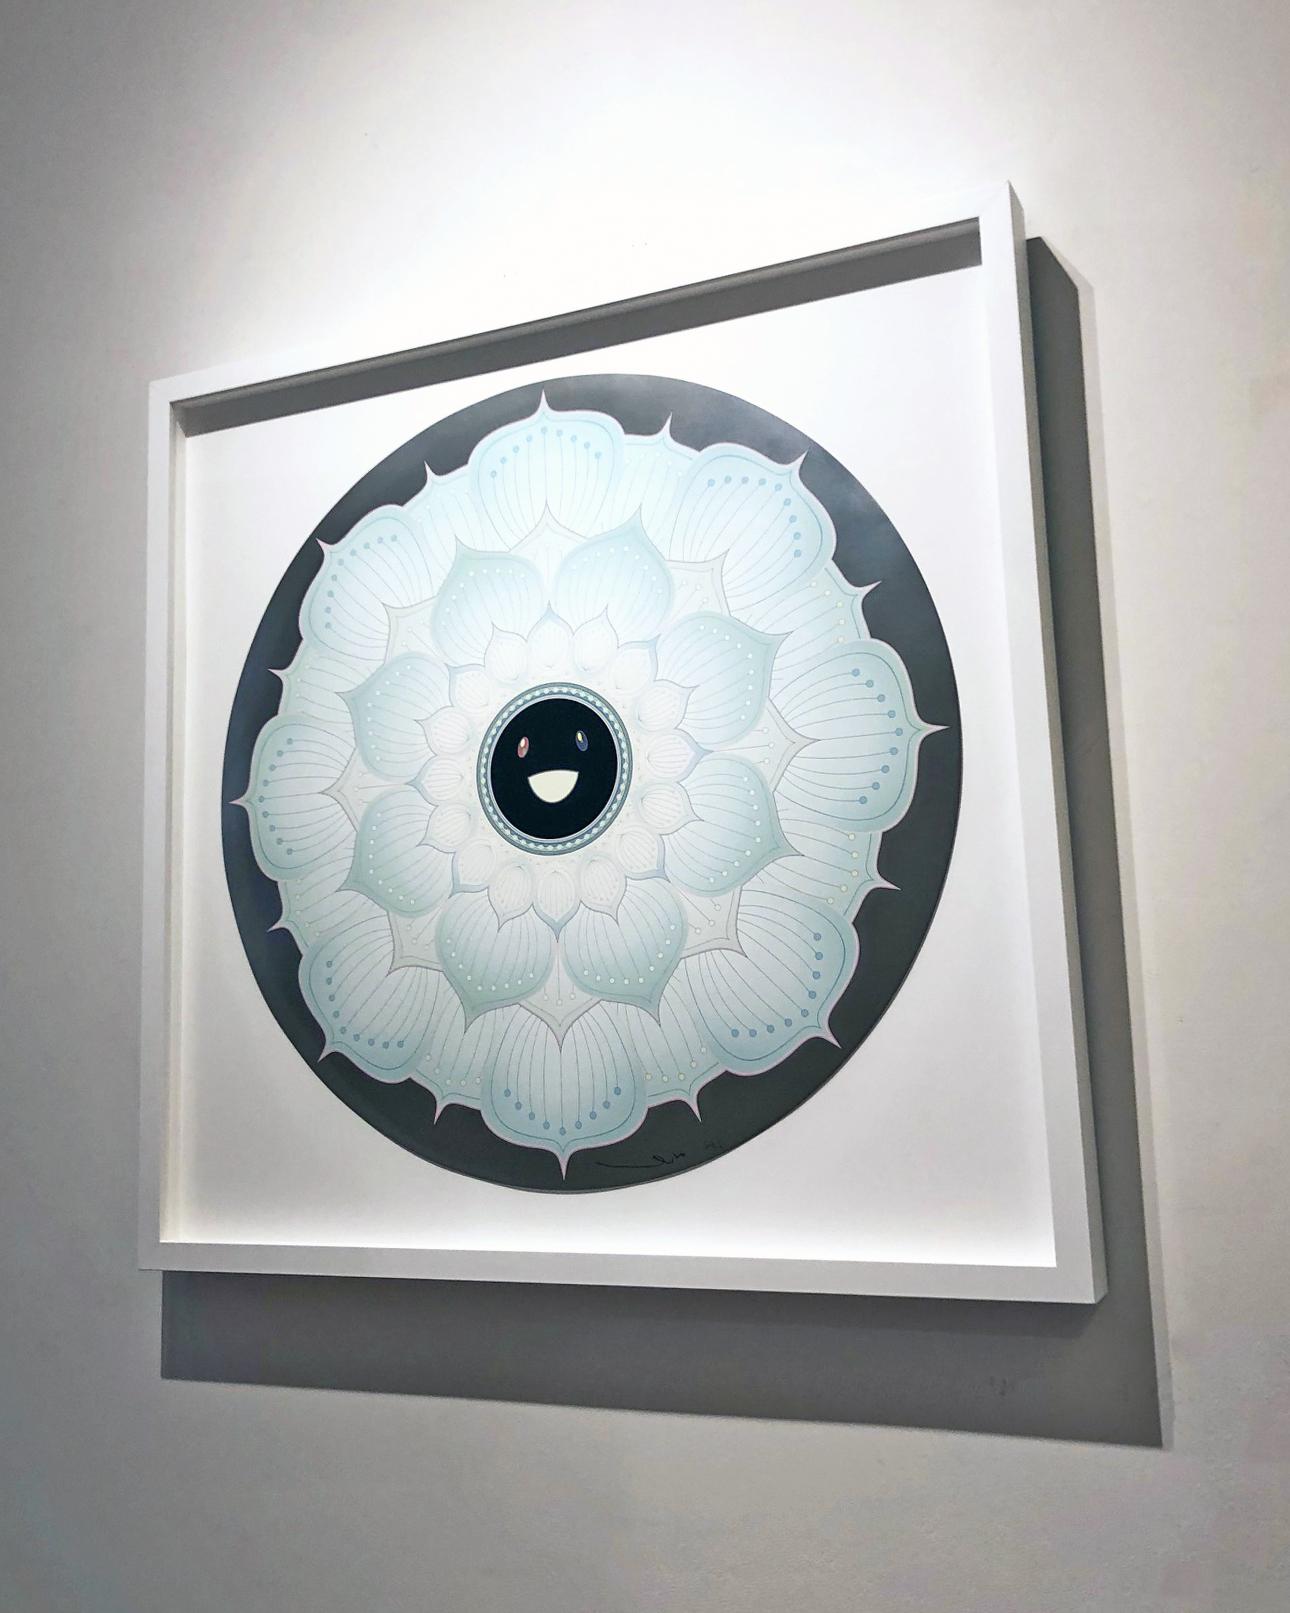 Artist:  Murakami, Takashi
Title:  Lotus Flower (White)
Date:  2010
Medium:  Offset lithograph printed in colors with silver foil on smooth wove paper
Unframed Dimensions:  27.95